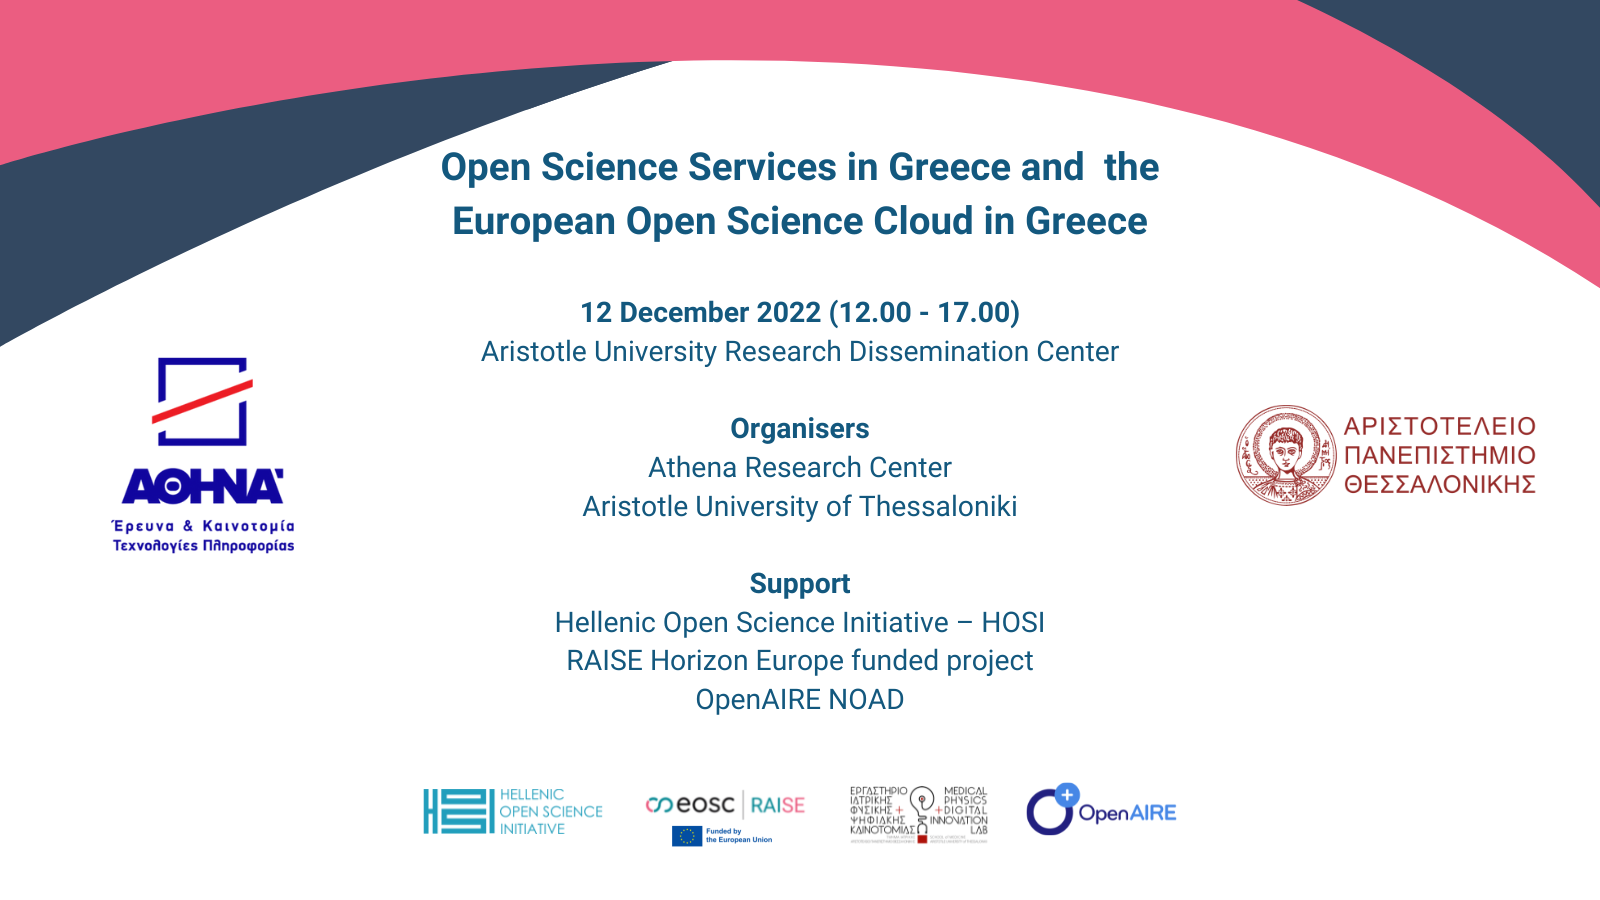 Open Science Services in Greece